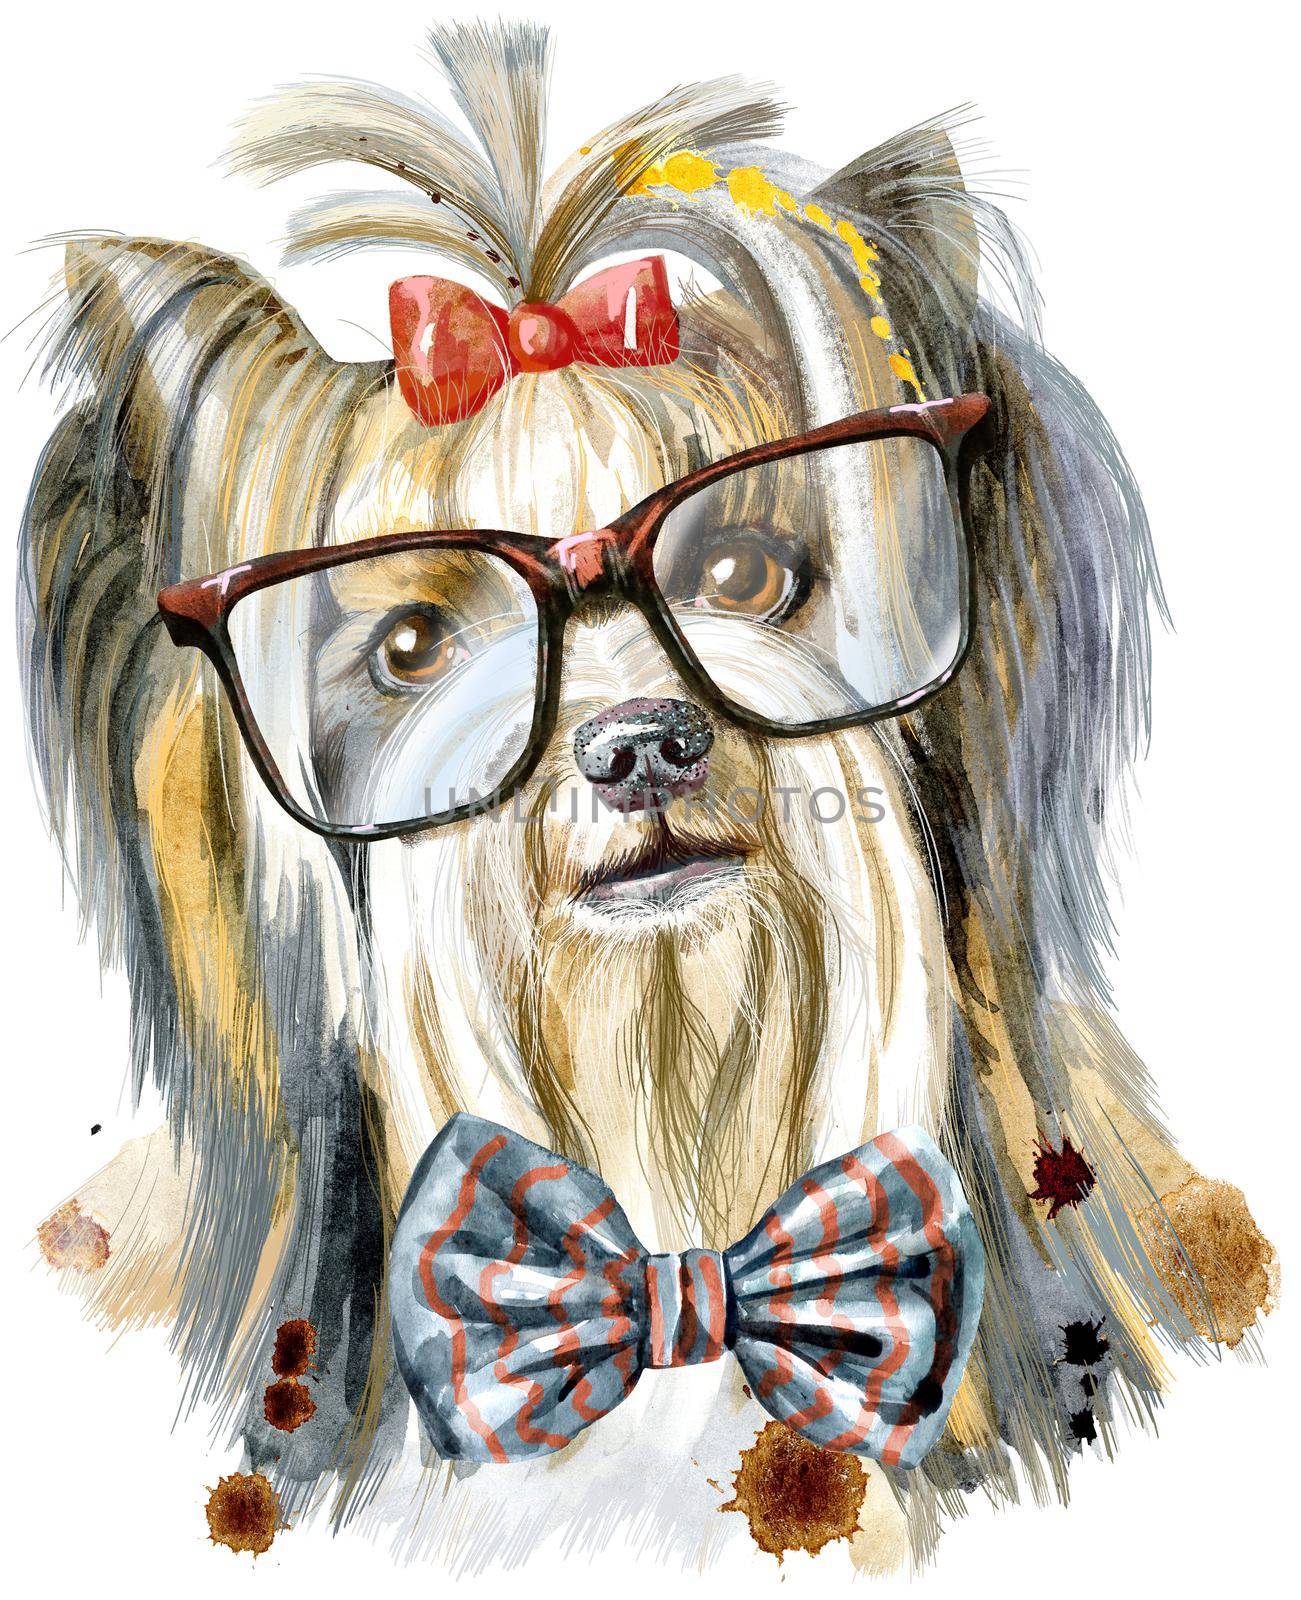 Dog, yorkie with bow-tie and glasses on white background. Hand drawn sweet pet illustration.